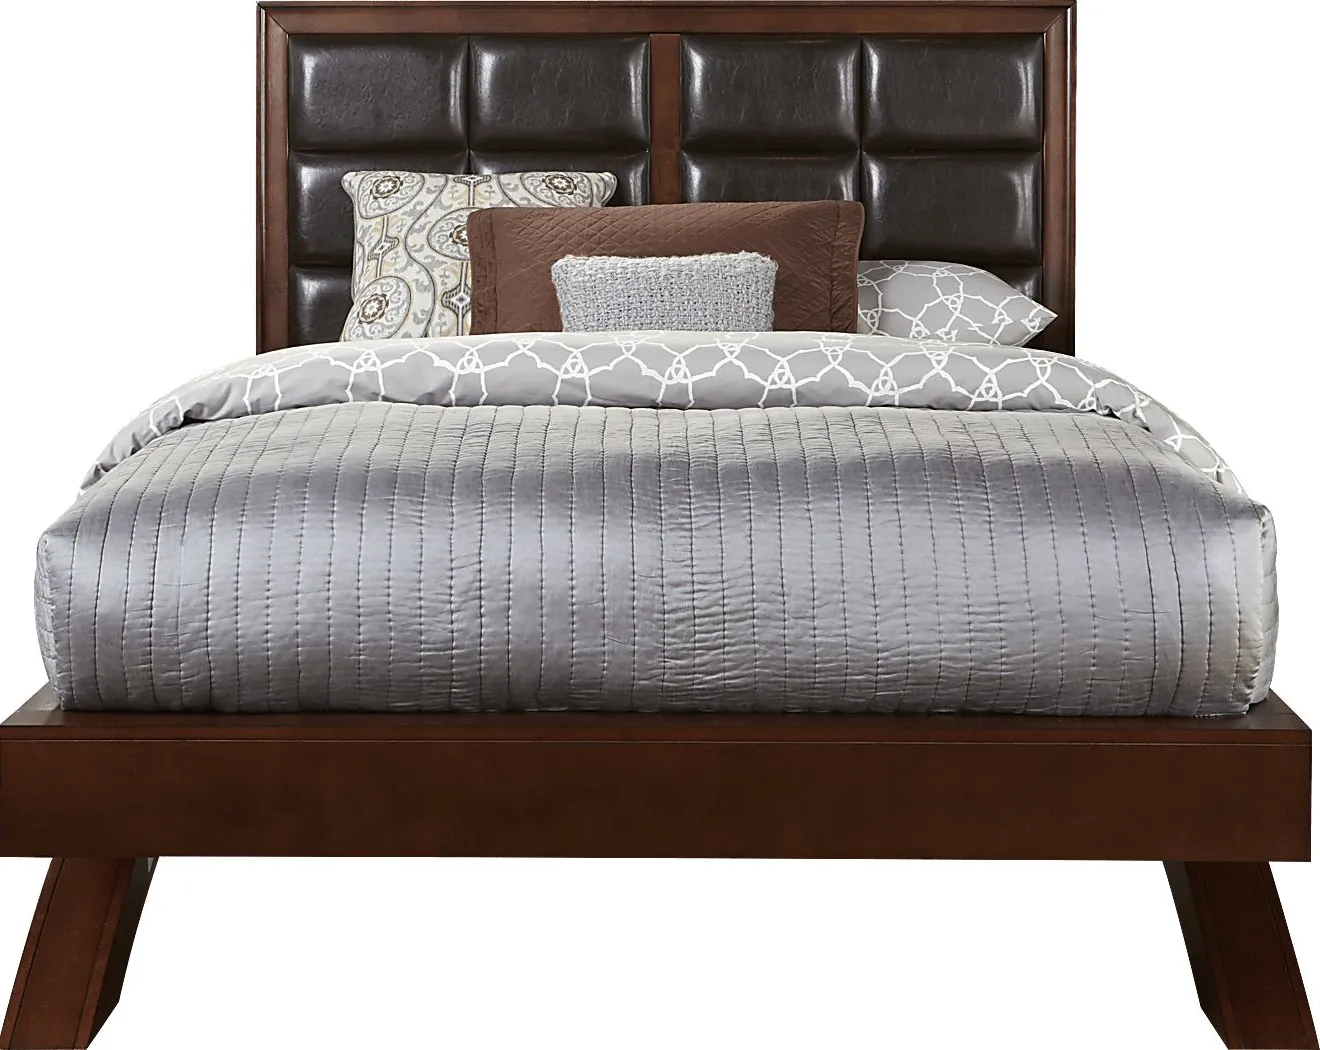 Belcourt Brown Cherry 3 Pc King Upholstered Platform Bed